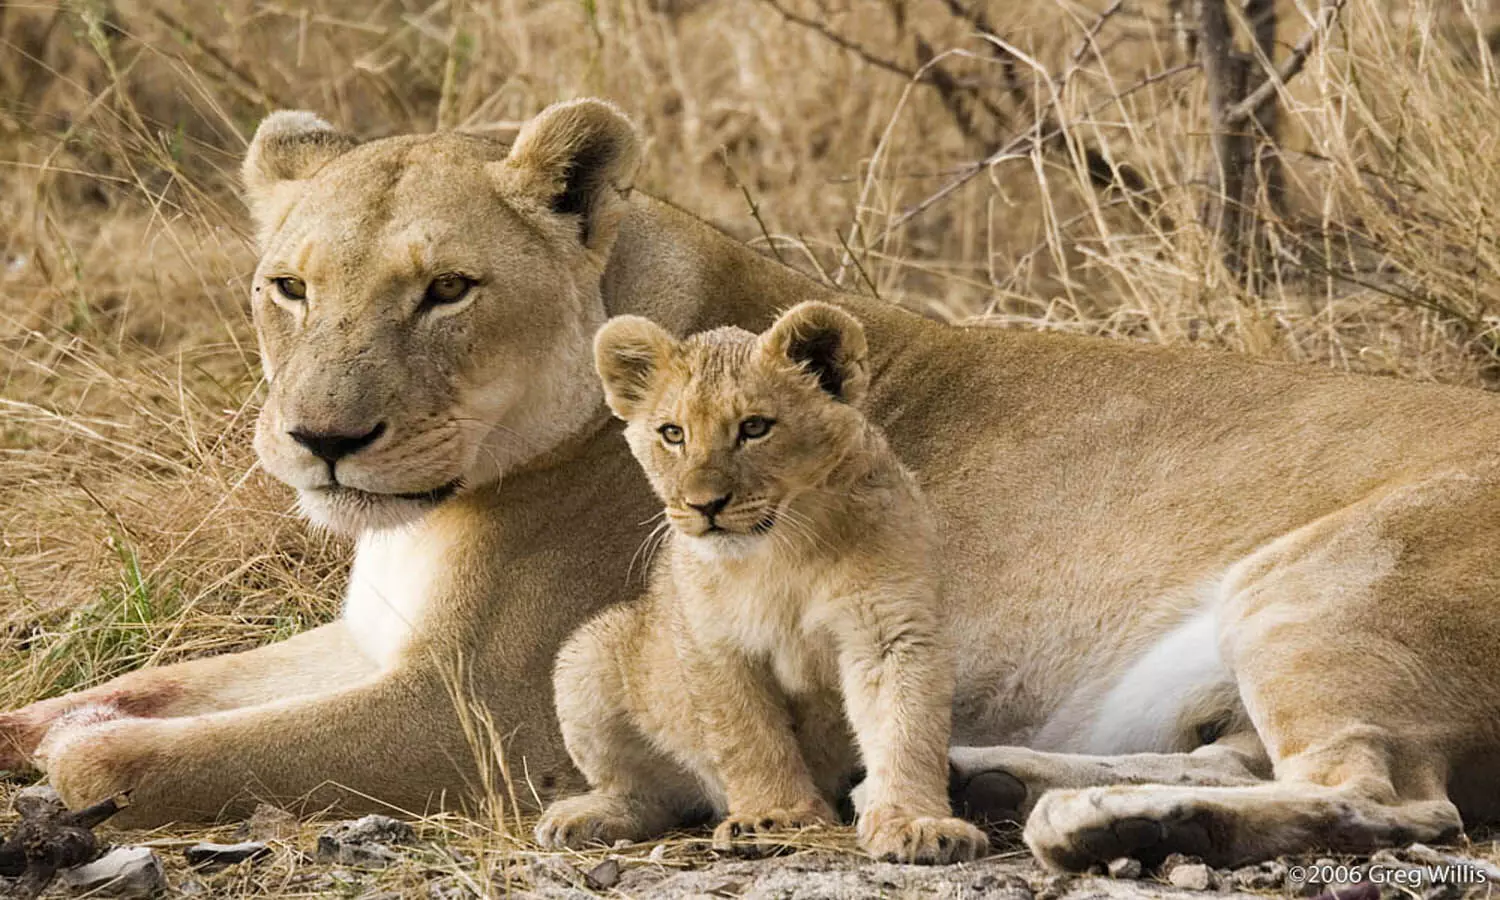 VIDEO: Lioness playing with her cub wins hearts; Netizens call them Cute